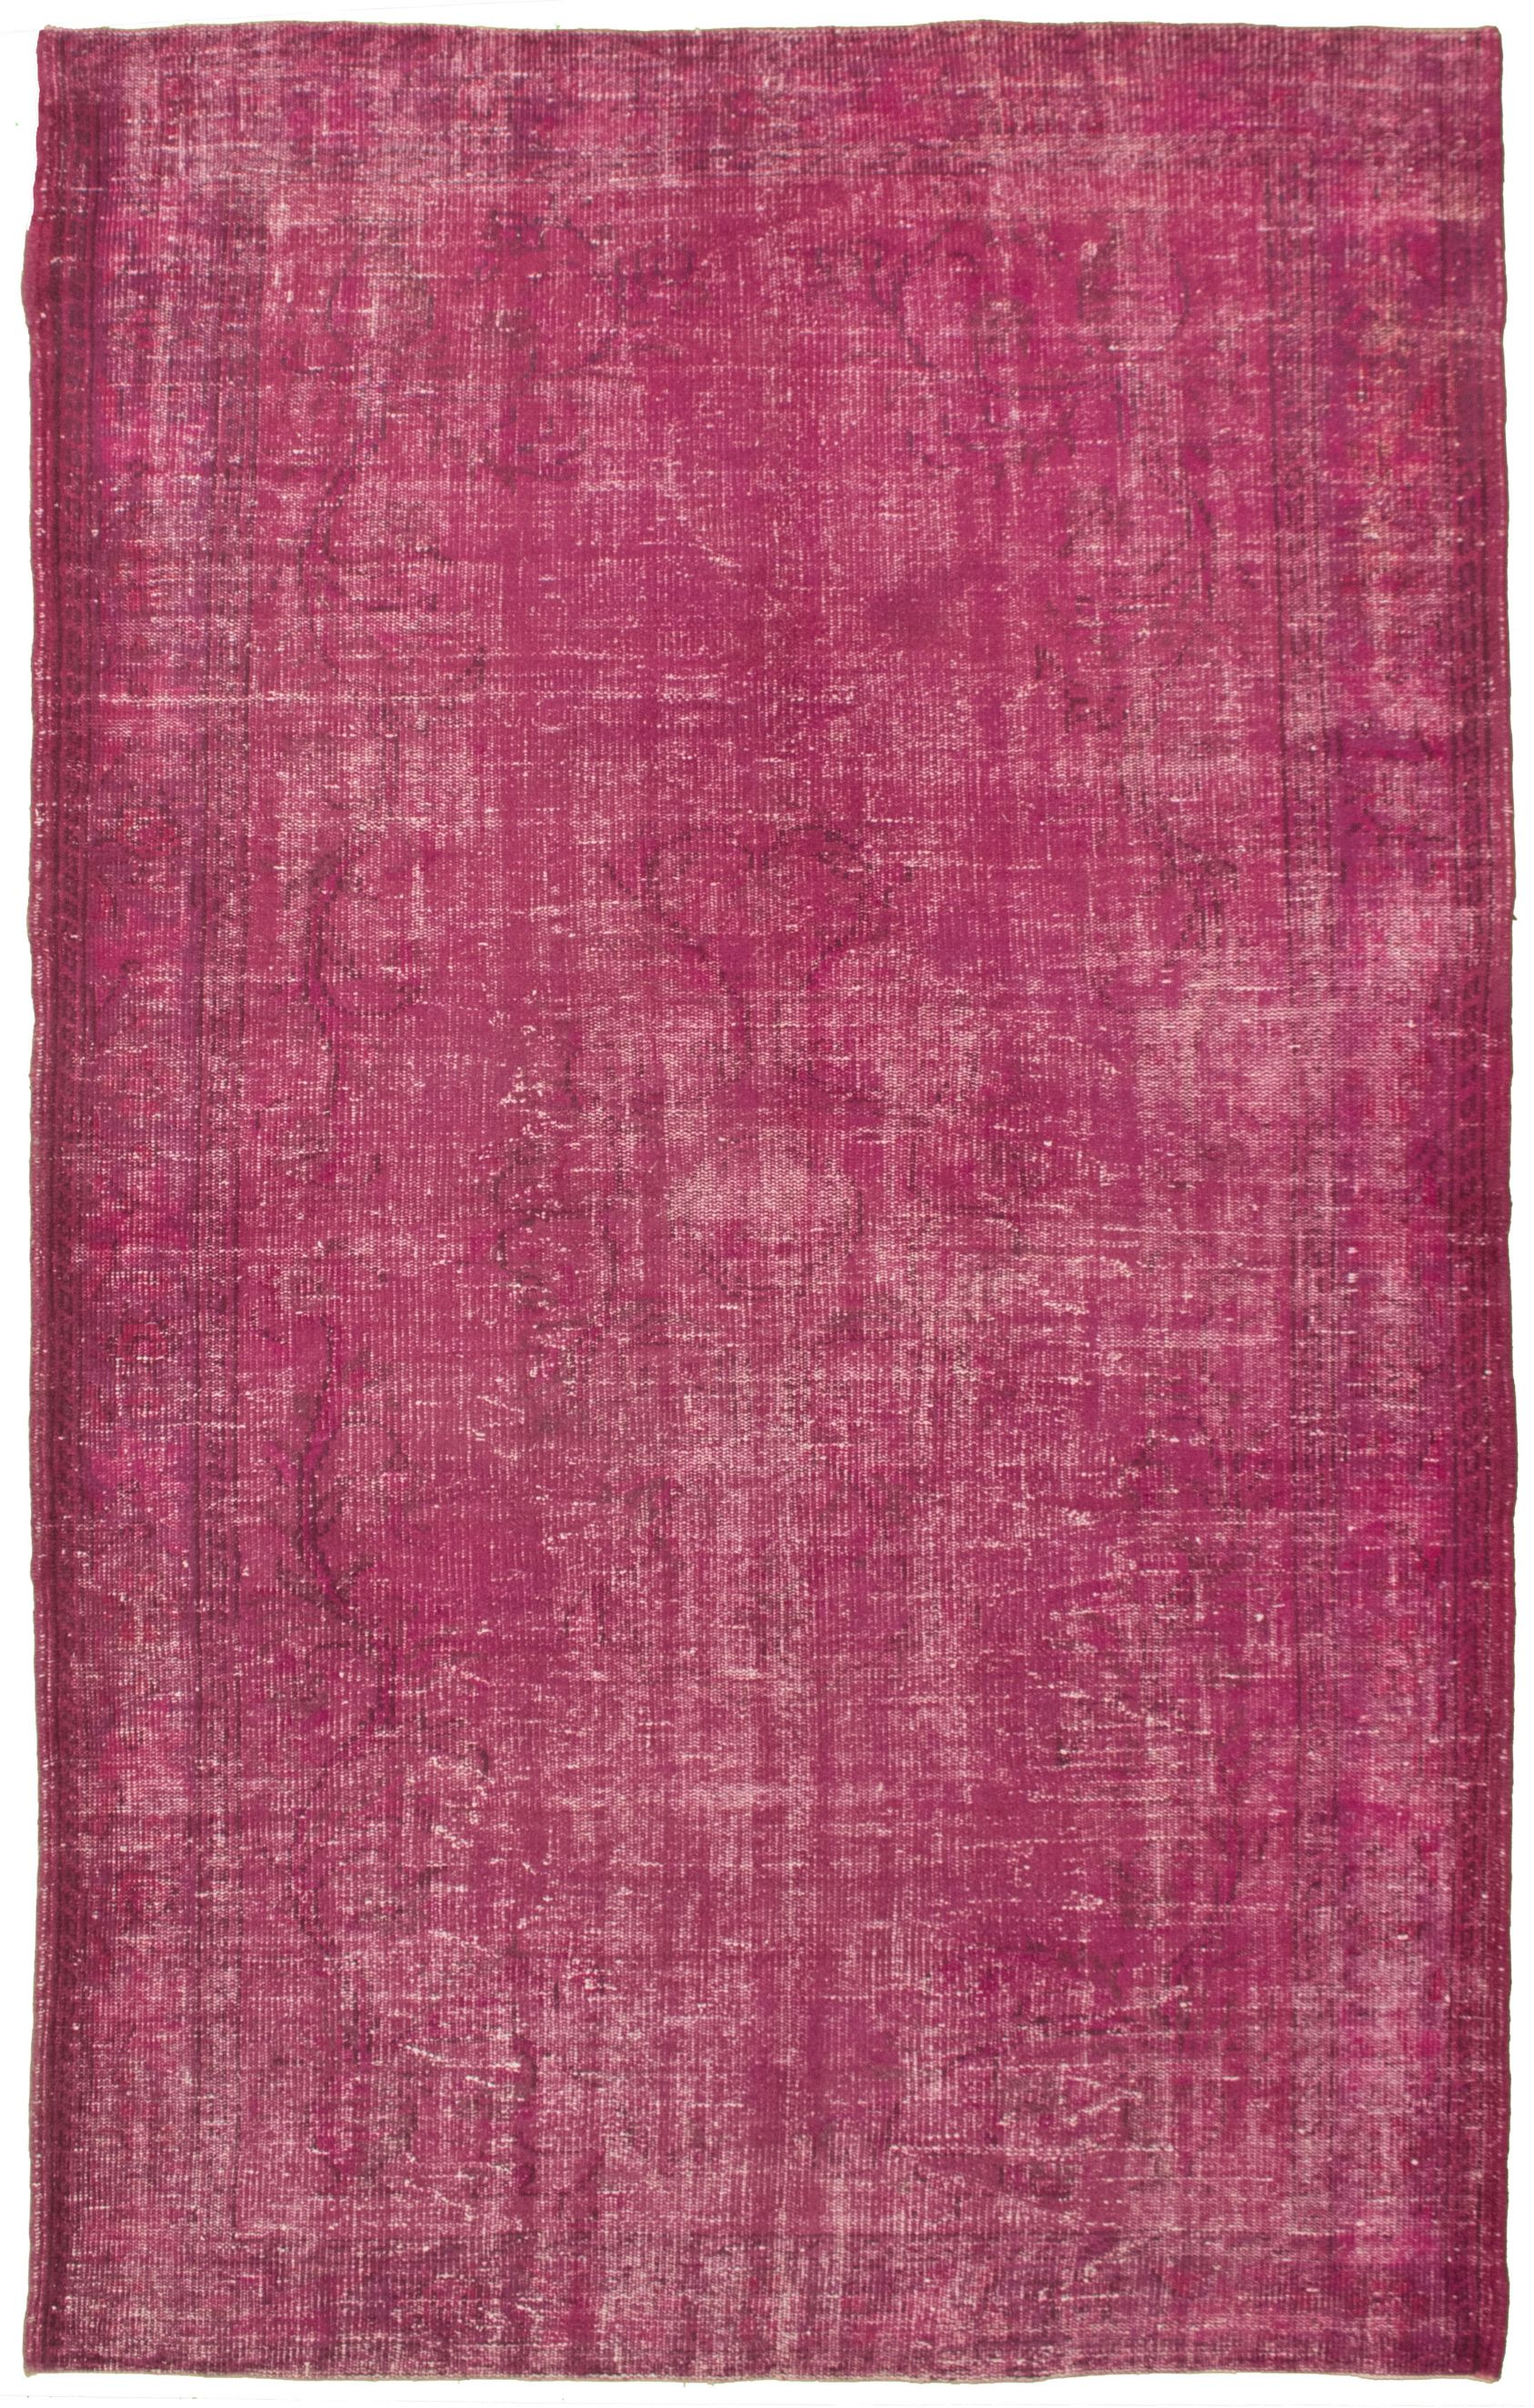 Hand-knotted Color Transition Purple Wool Rug 6'1" x 9'10" Size: 6'1" x 9'10"  